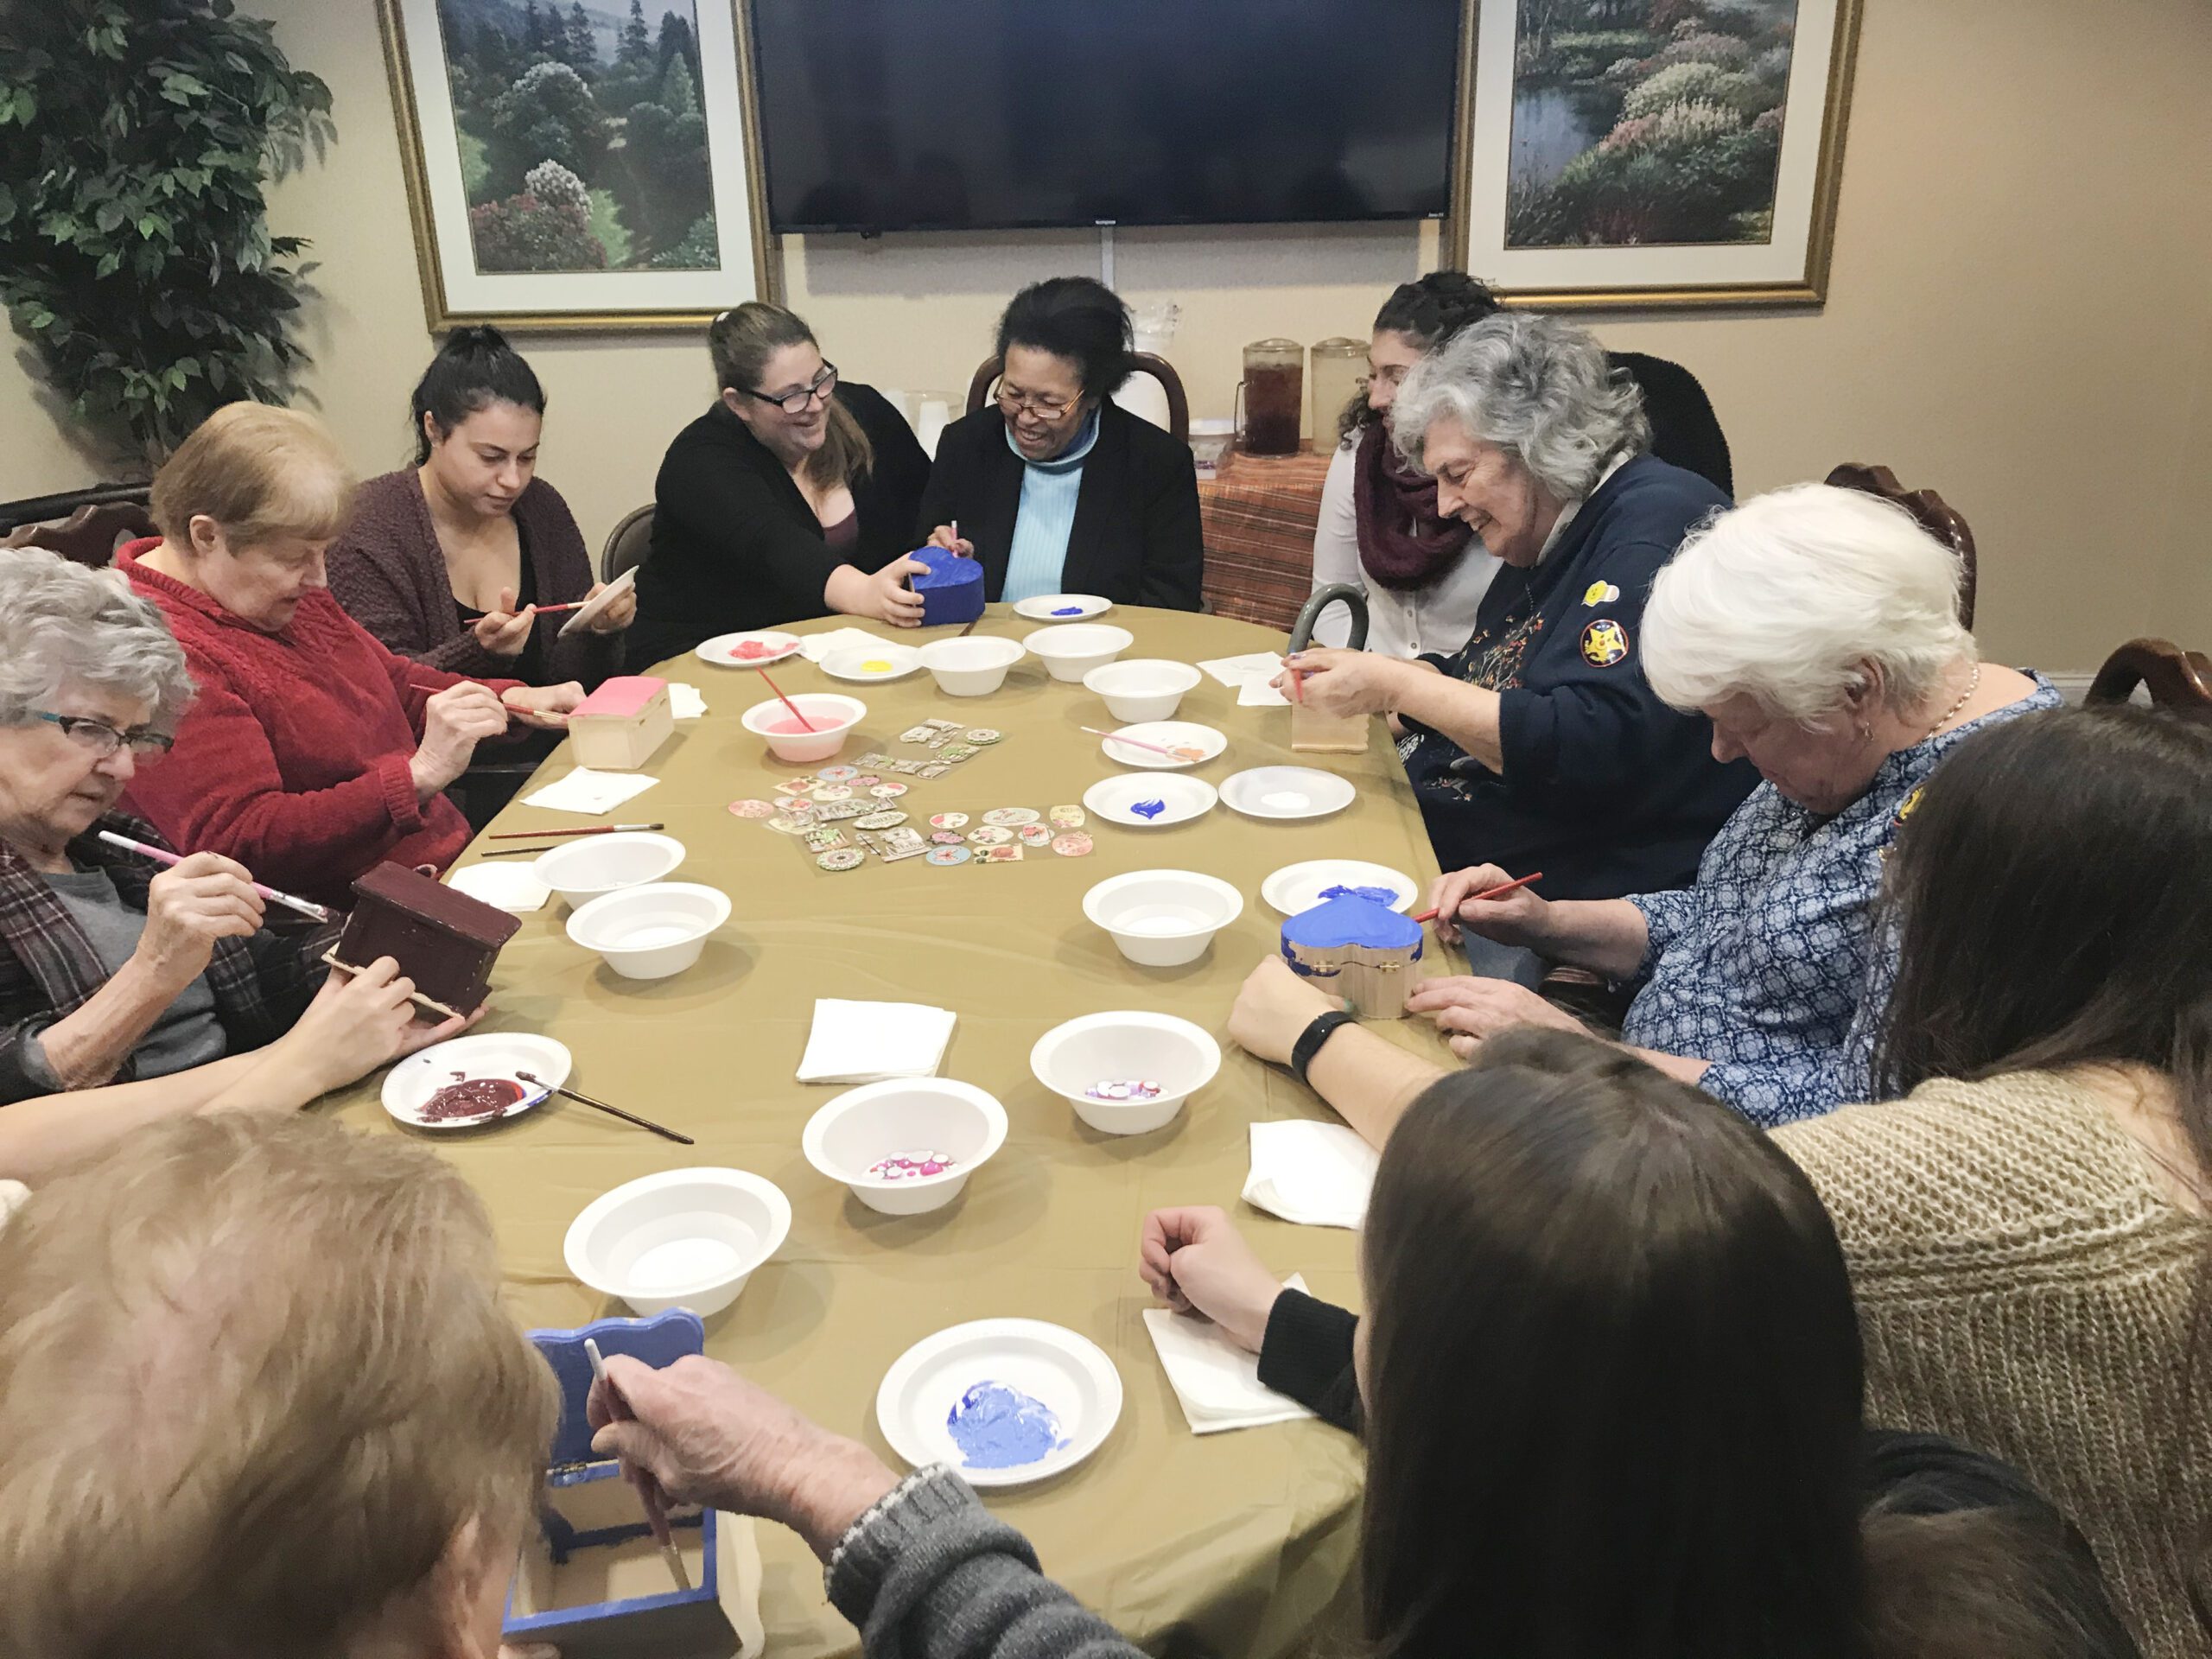 Large group seated at a table working on crafts, including students and participants at an assisted living facility